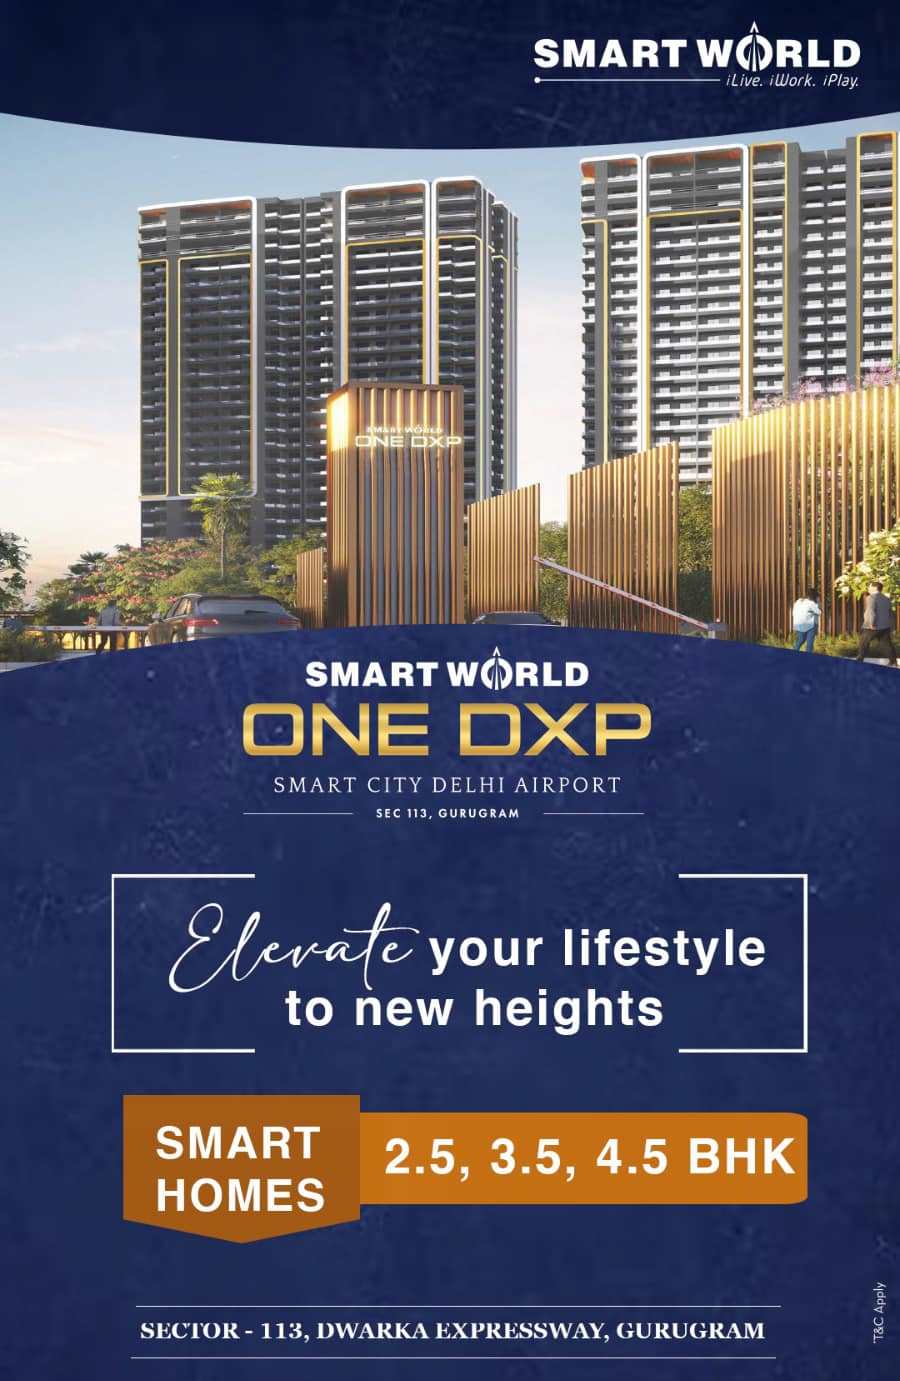 Book 2.5, 3.5 and 4.5 BHK Smart home Rs 1.83 Cr at Smart World One DXP in Sector 113, Gurgaon Update